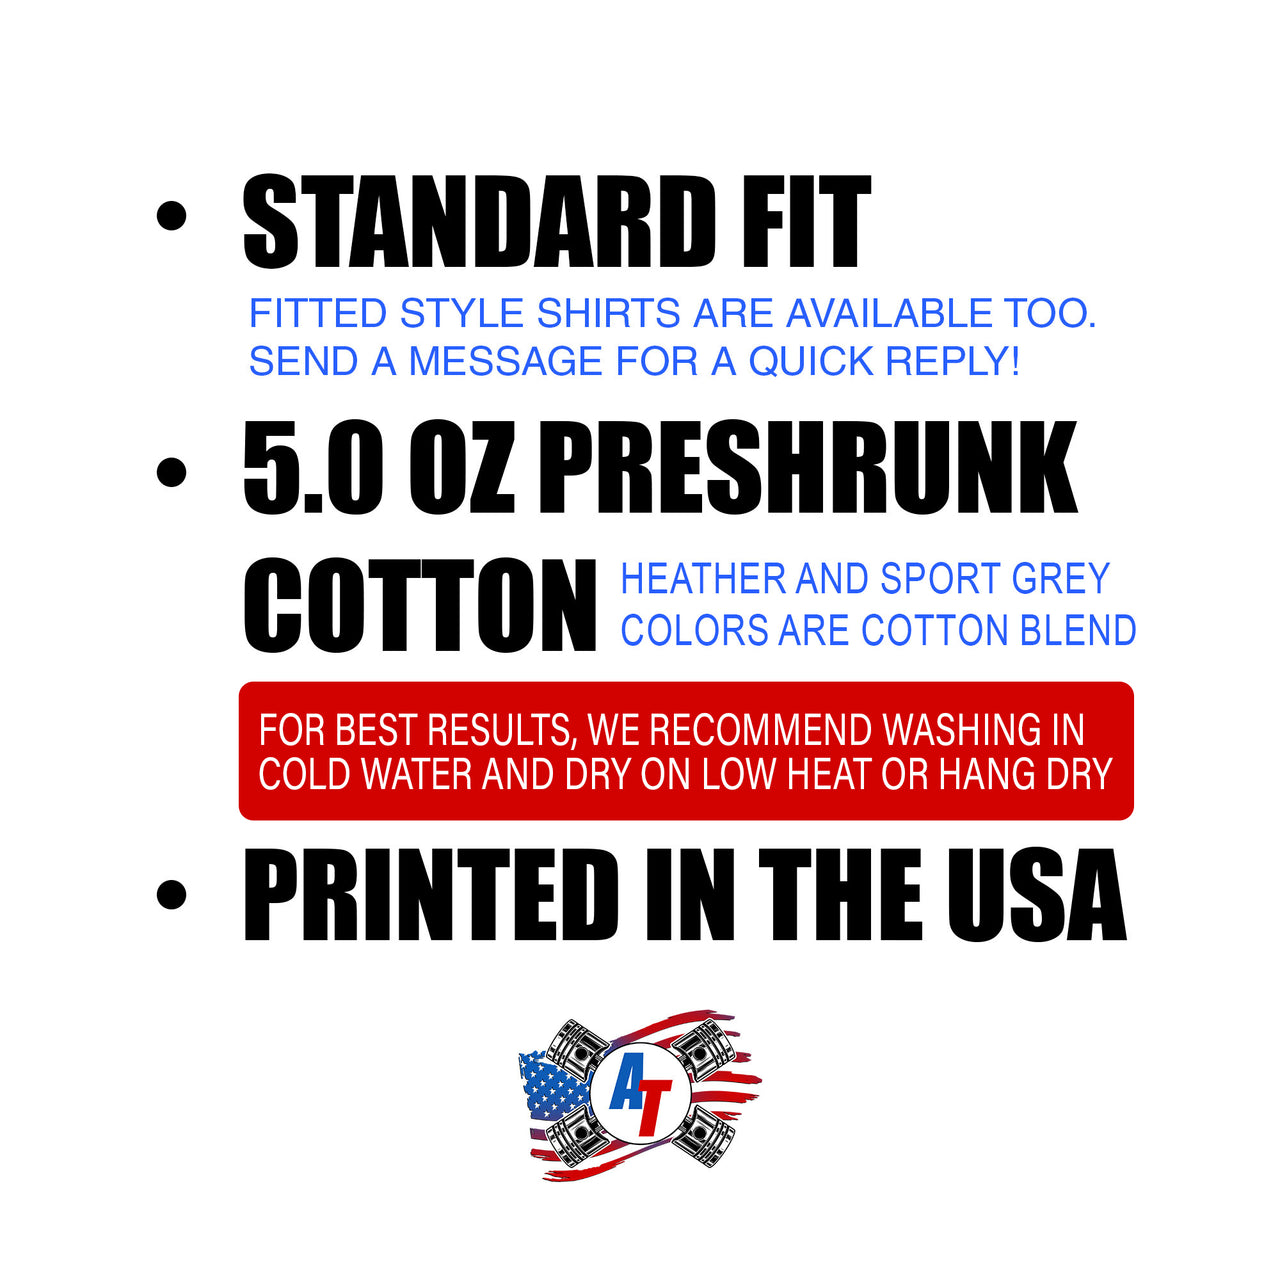 product information and care instructions